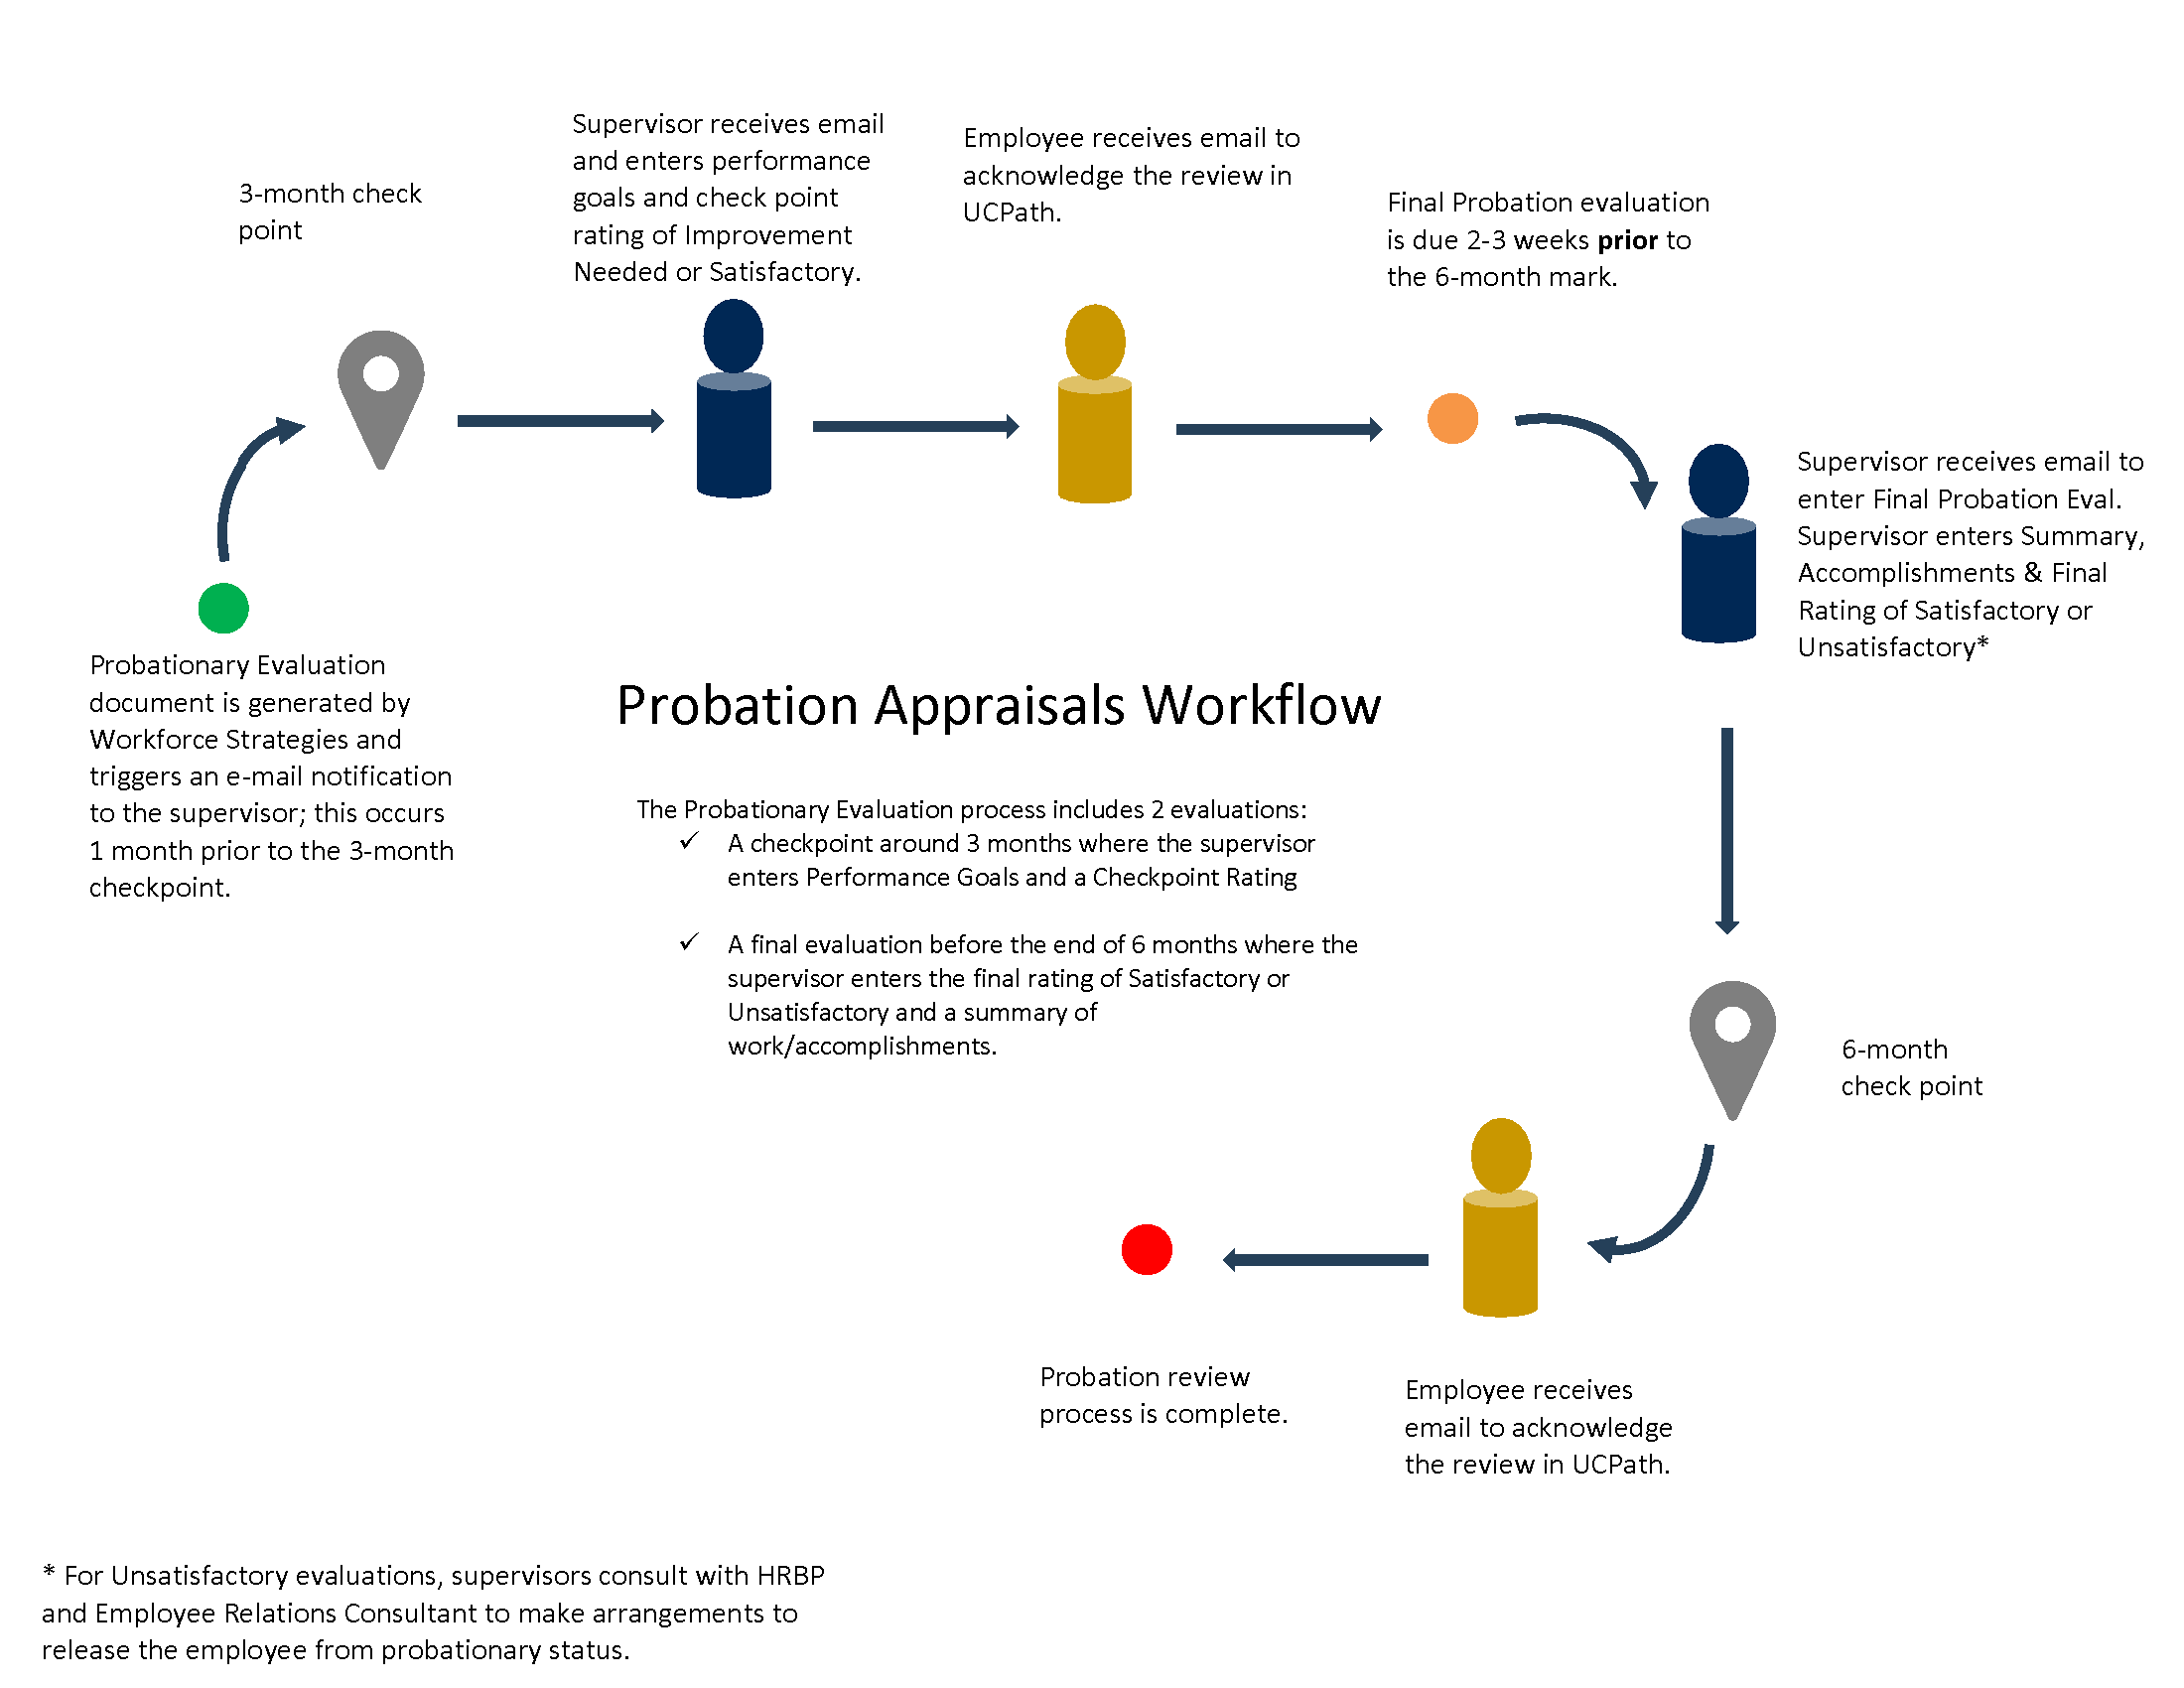 Workflow displaying the steps in the probation appraisal process. A PDF version is available for download.